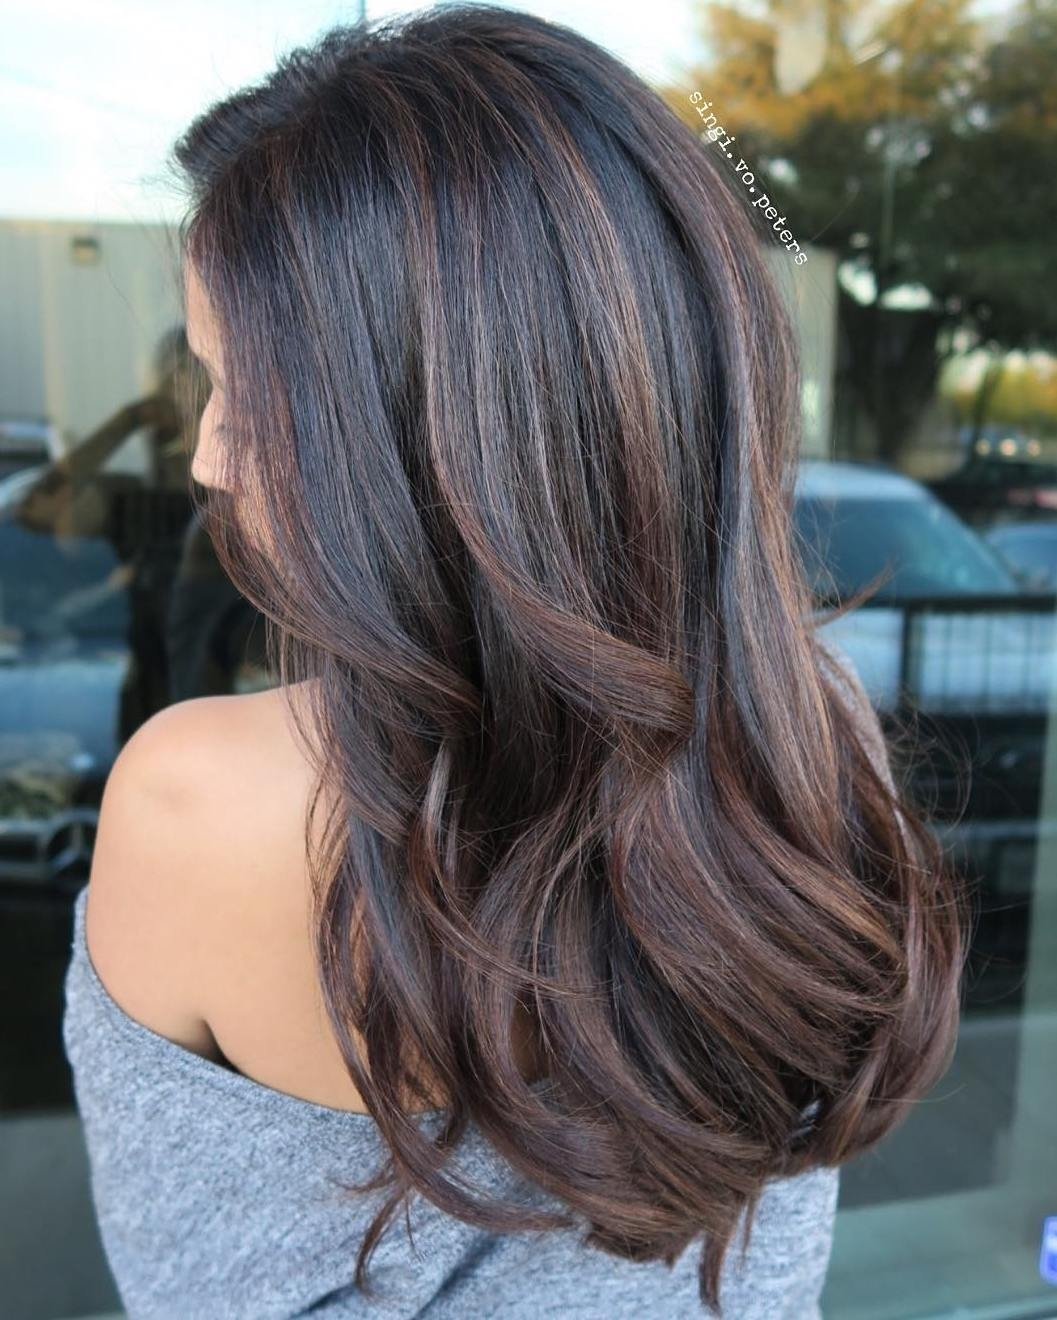 10 Gorgeous Hair Color Ideas For Dark Hair 70 balayage hair color ideas with blonde brown and caramel highlights 10 2022